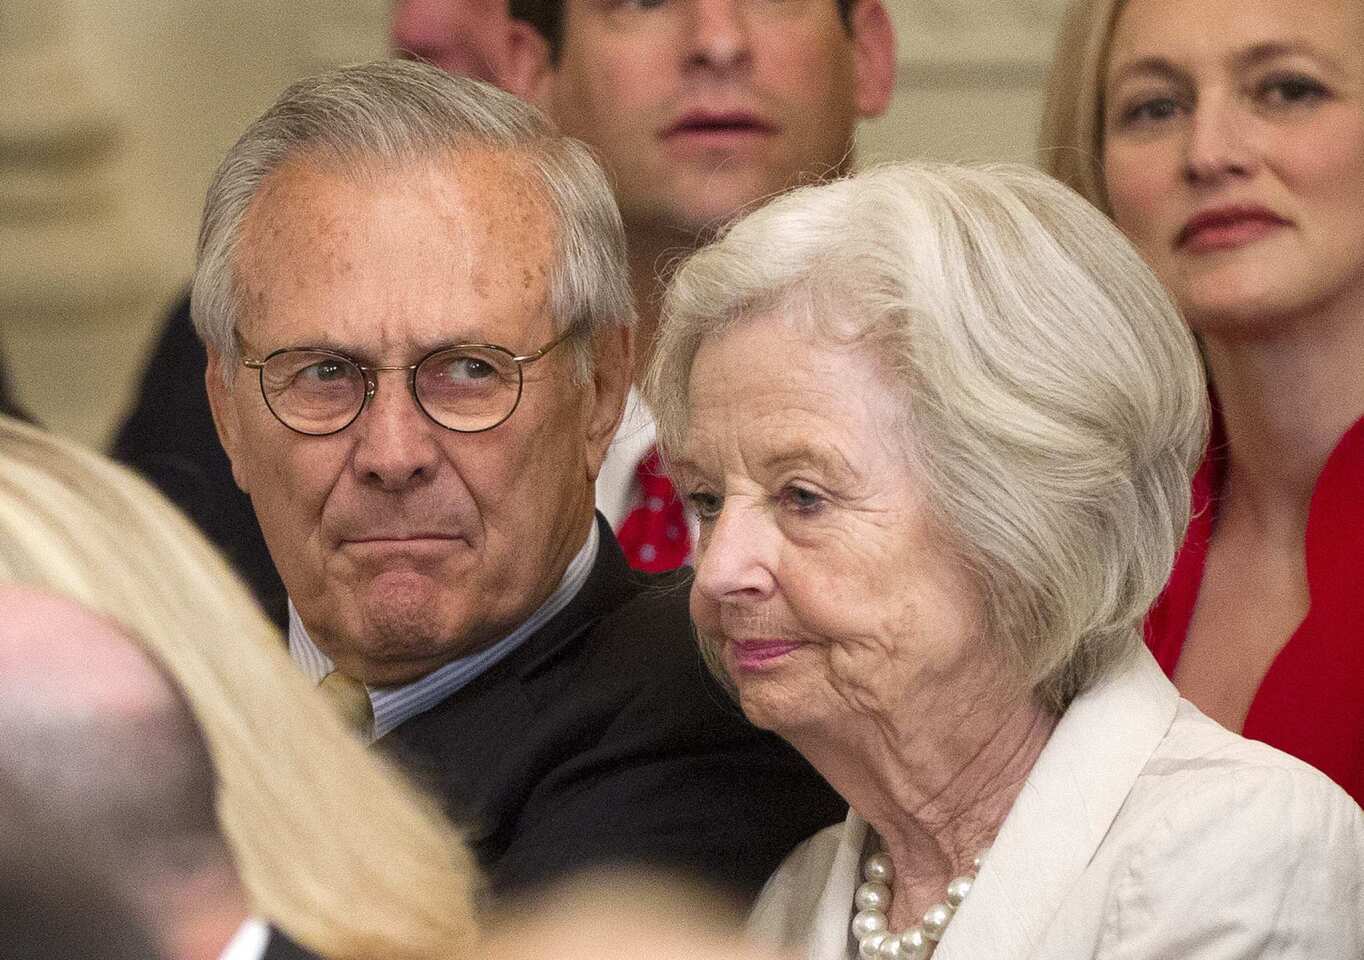 Former Defense Secretary Donald Rumsfeld and his wife, Joyce, attend the unveiling of the official portraits of President George W. Bush and his wife, Laura.